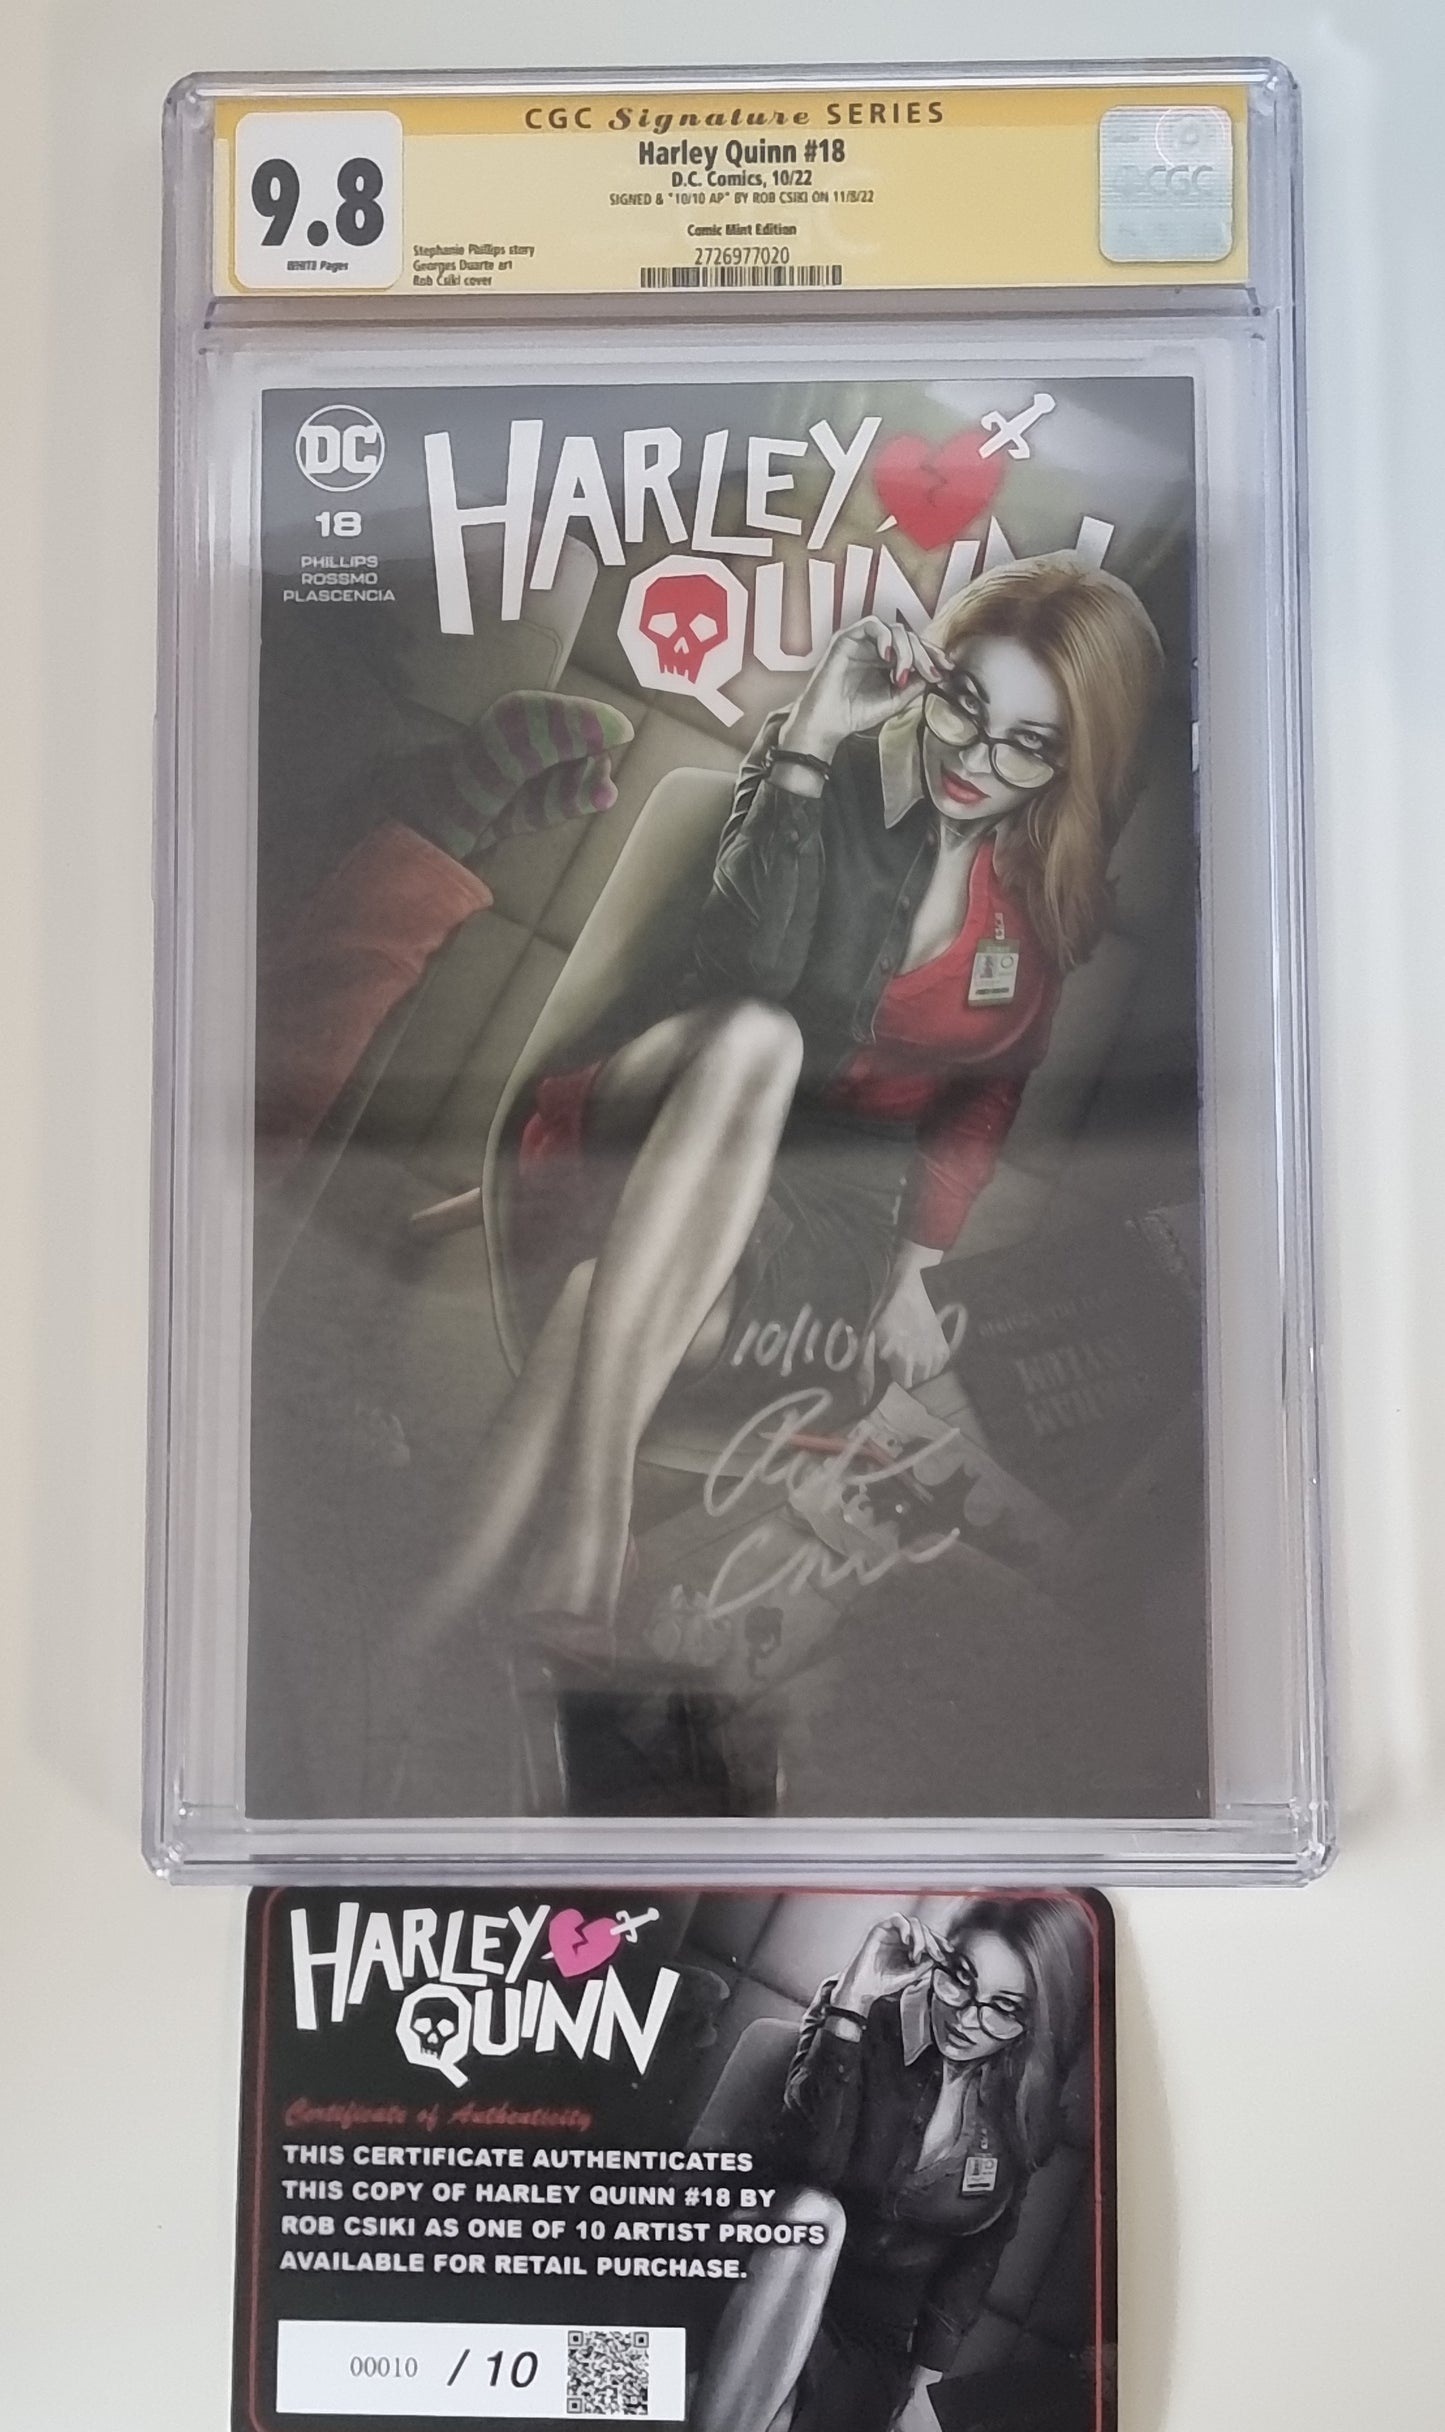 HARLEY QUINN #18 ROB CSIKI VARIANT ARTISTS PROOF LIMITED T0 10 COPIES WITH NUMBERED COA CGC SS 9.8